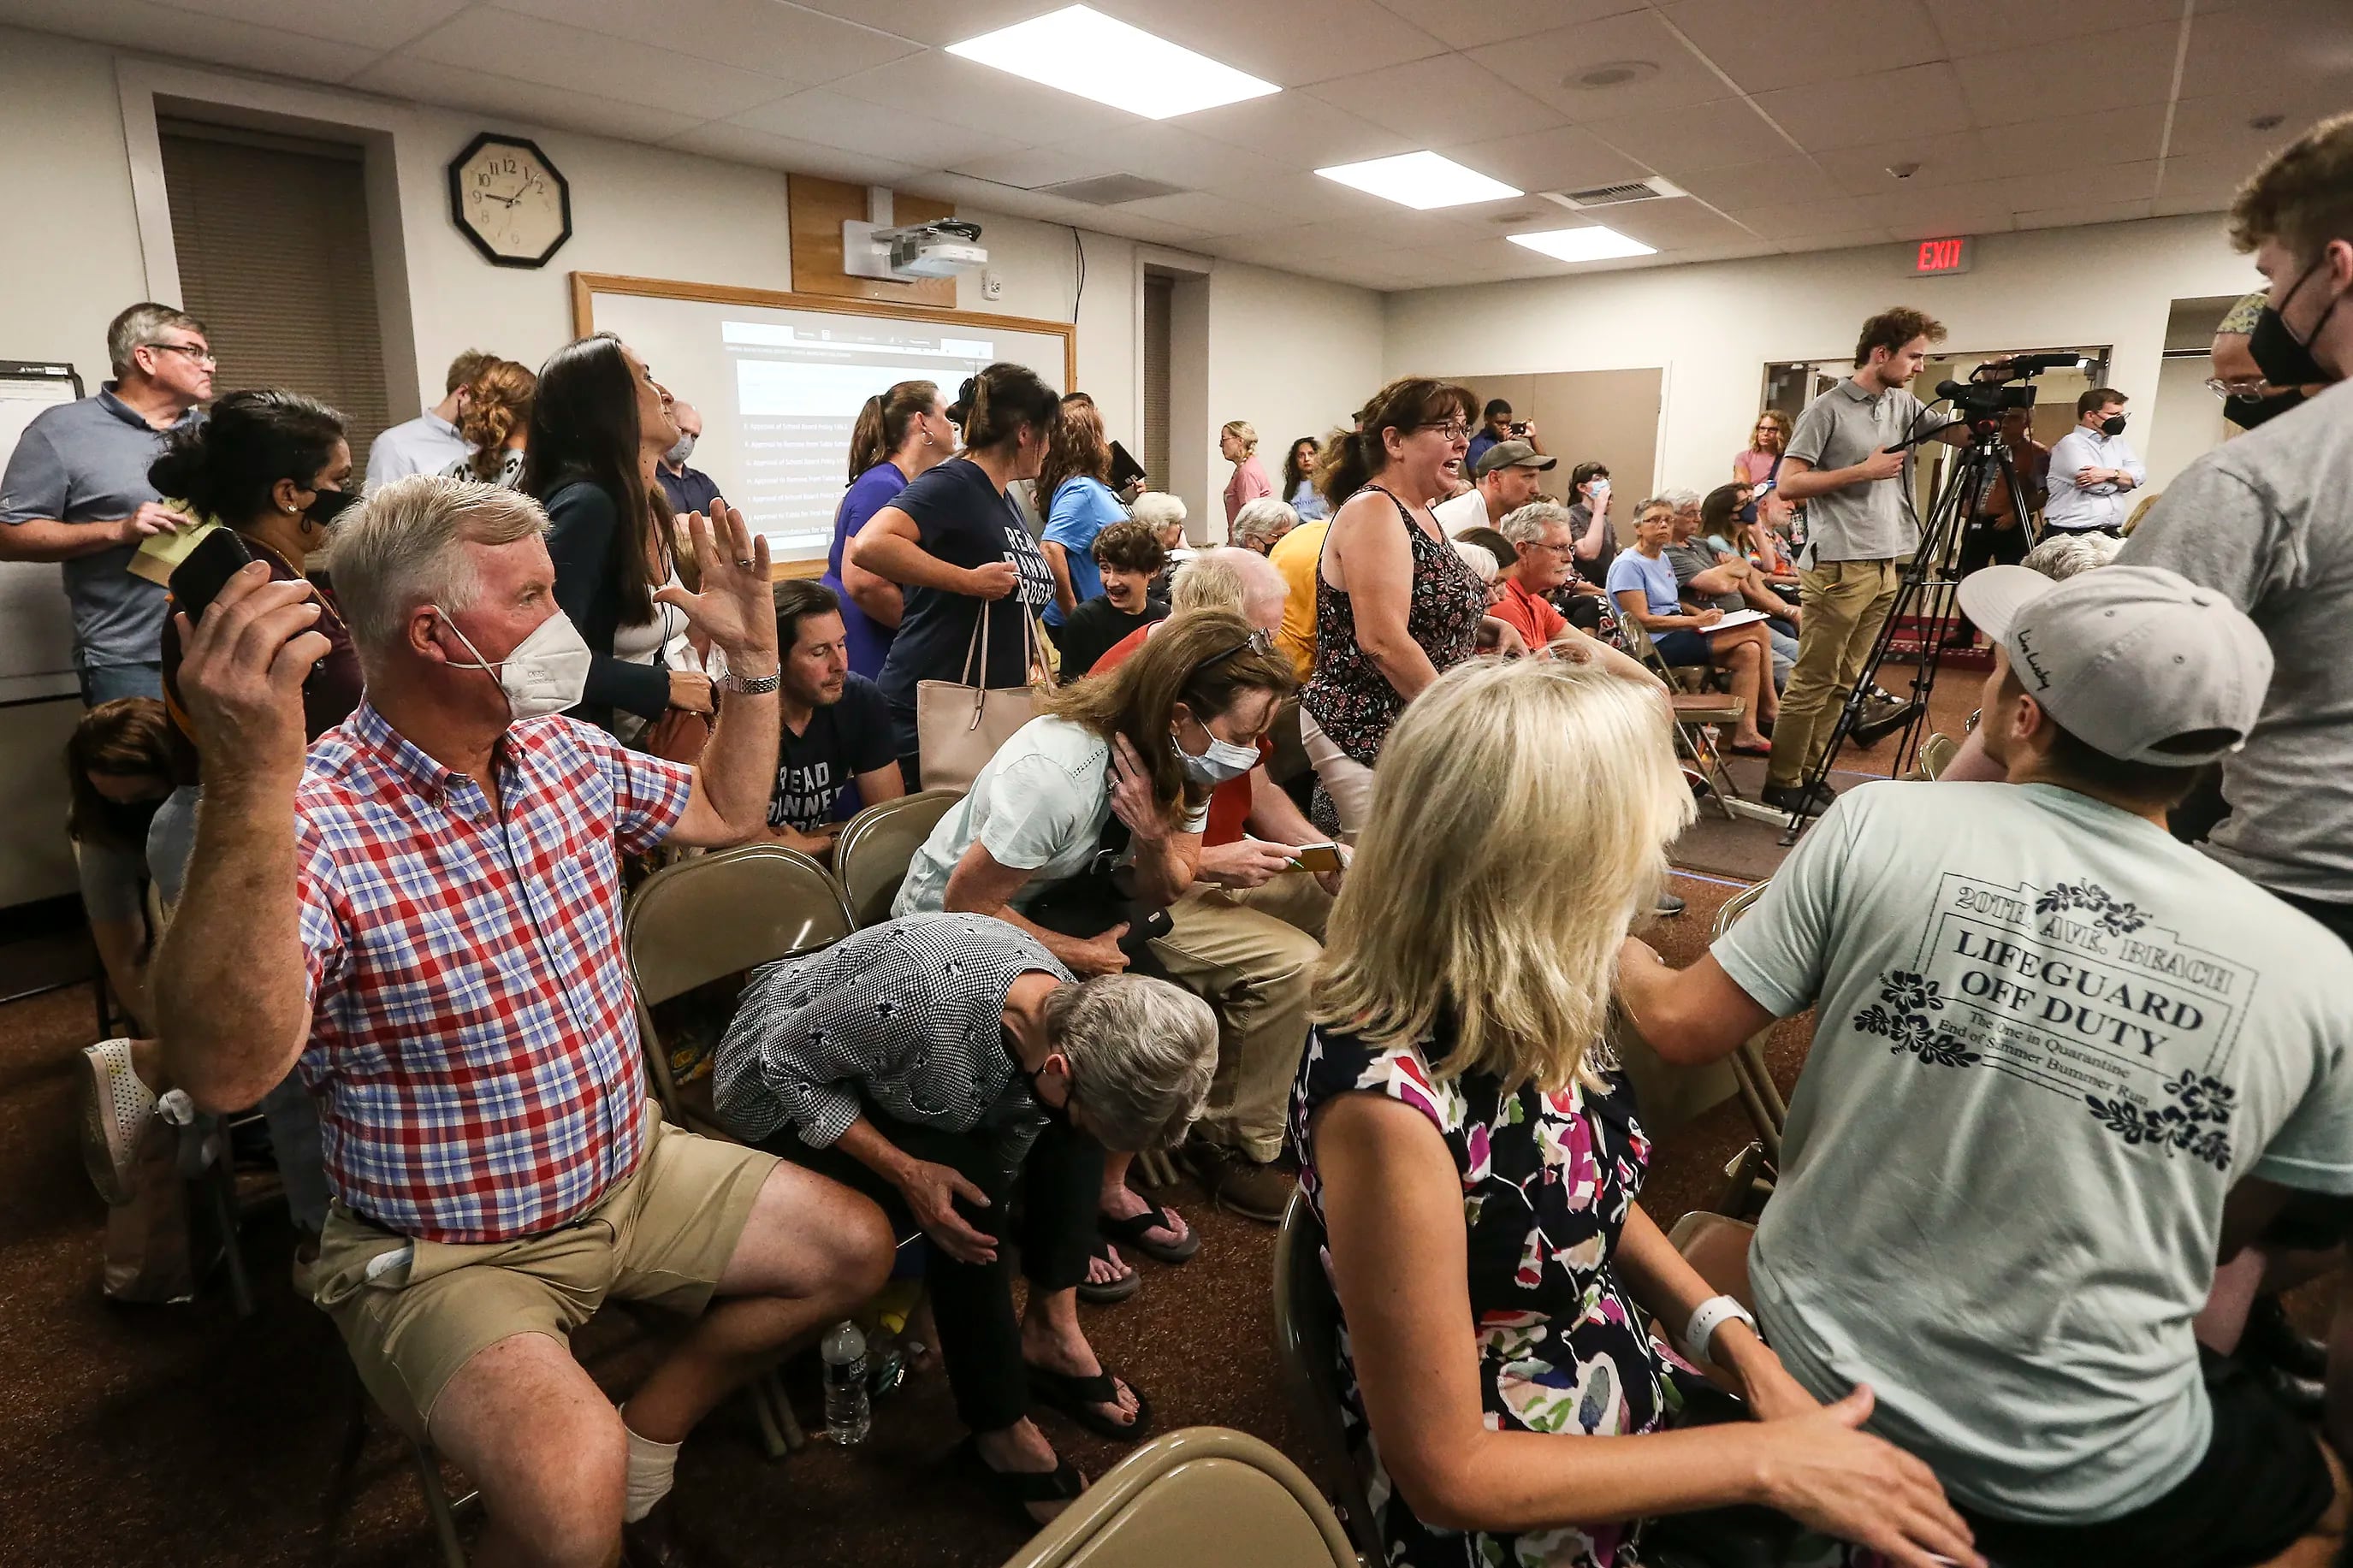 Many members of the public leave the school board meeting in Doylestown unhappy as the Central Bucks School District passed a vote on a library policy targeting books with "sexualized content." 